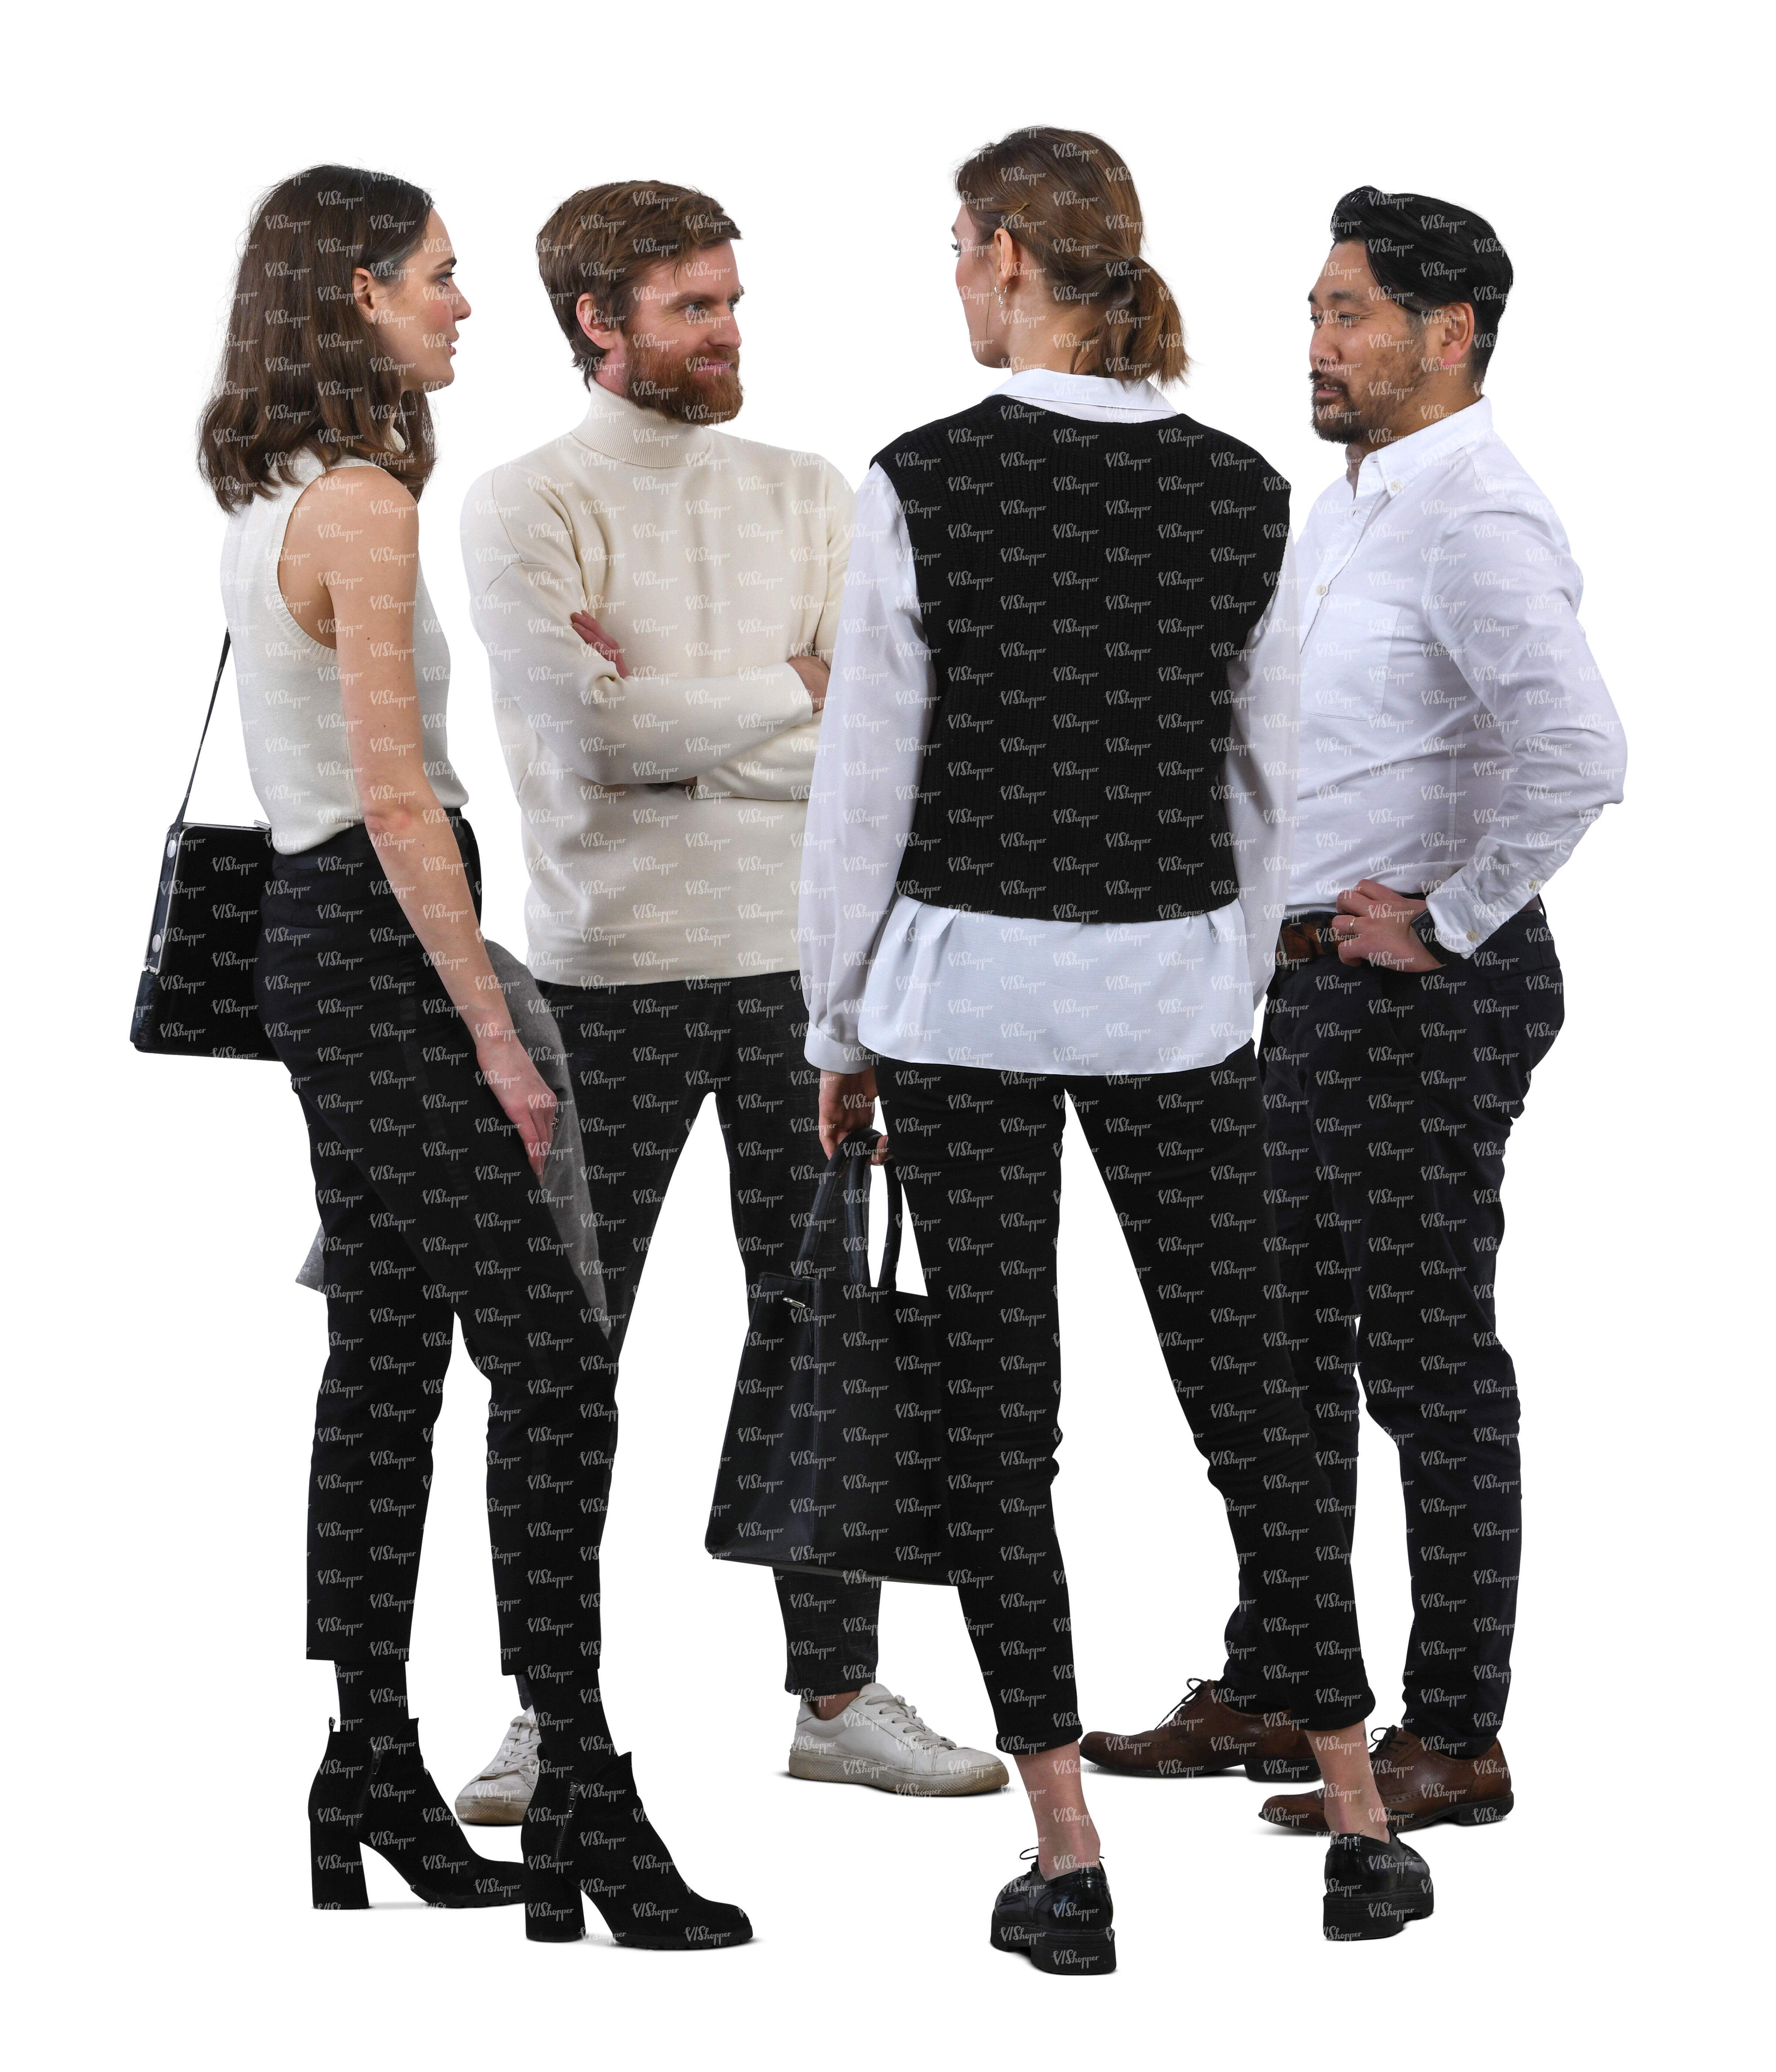 cut out group of four people standing and talking - VIShopper